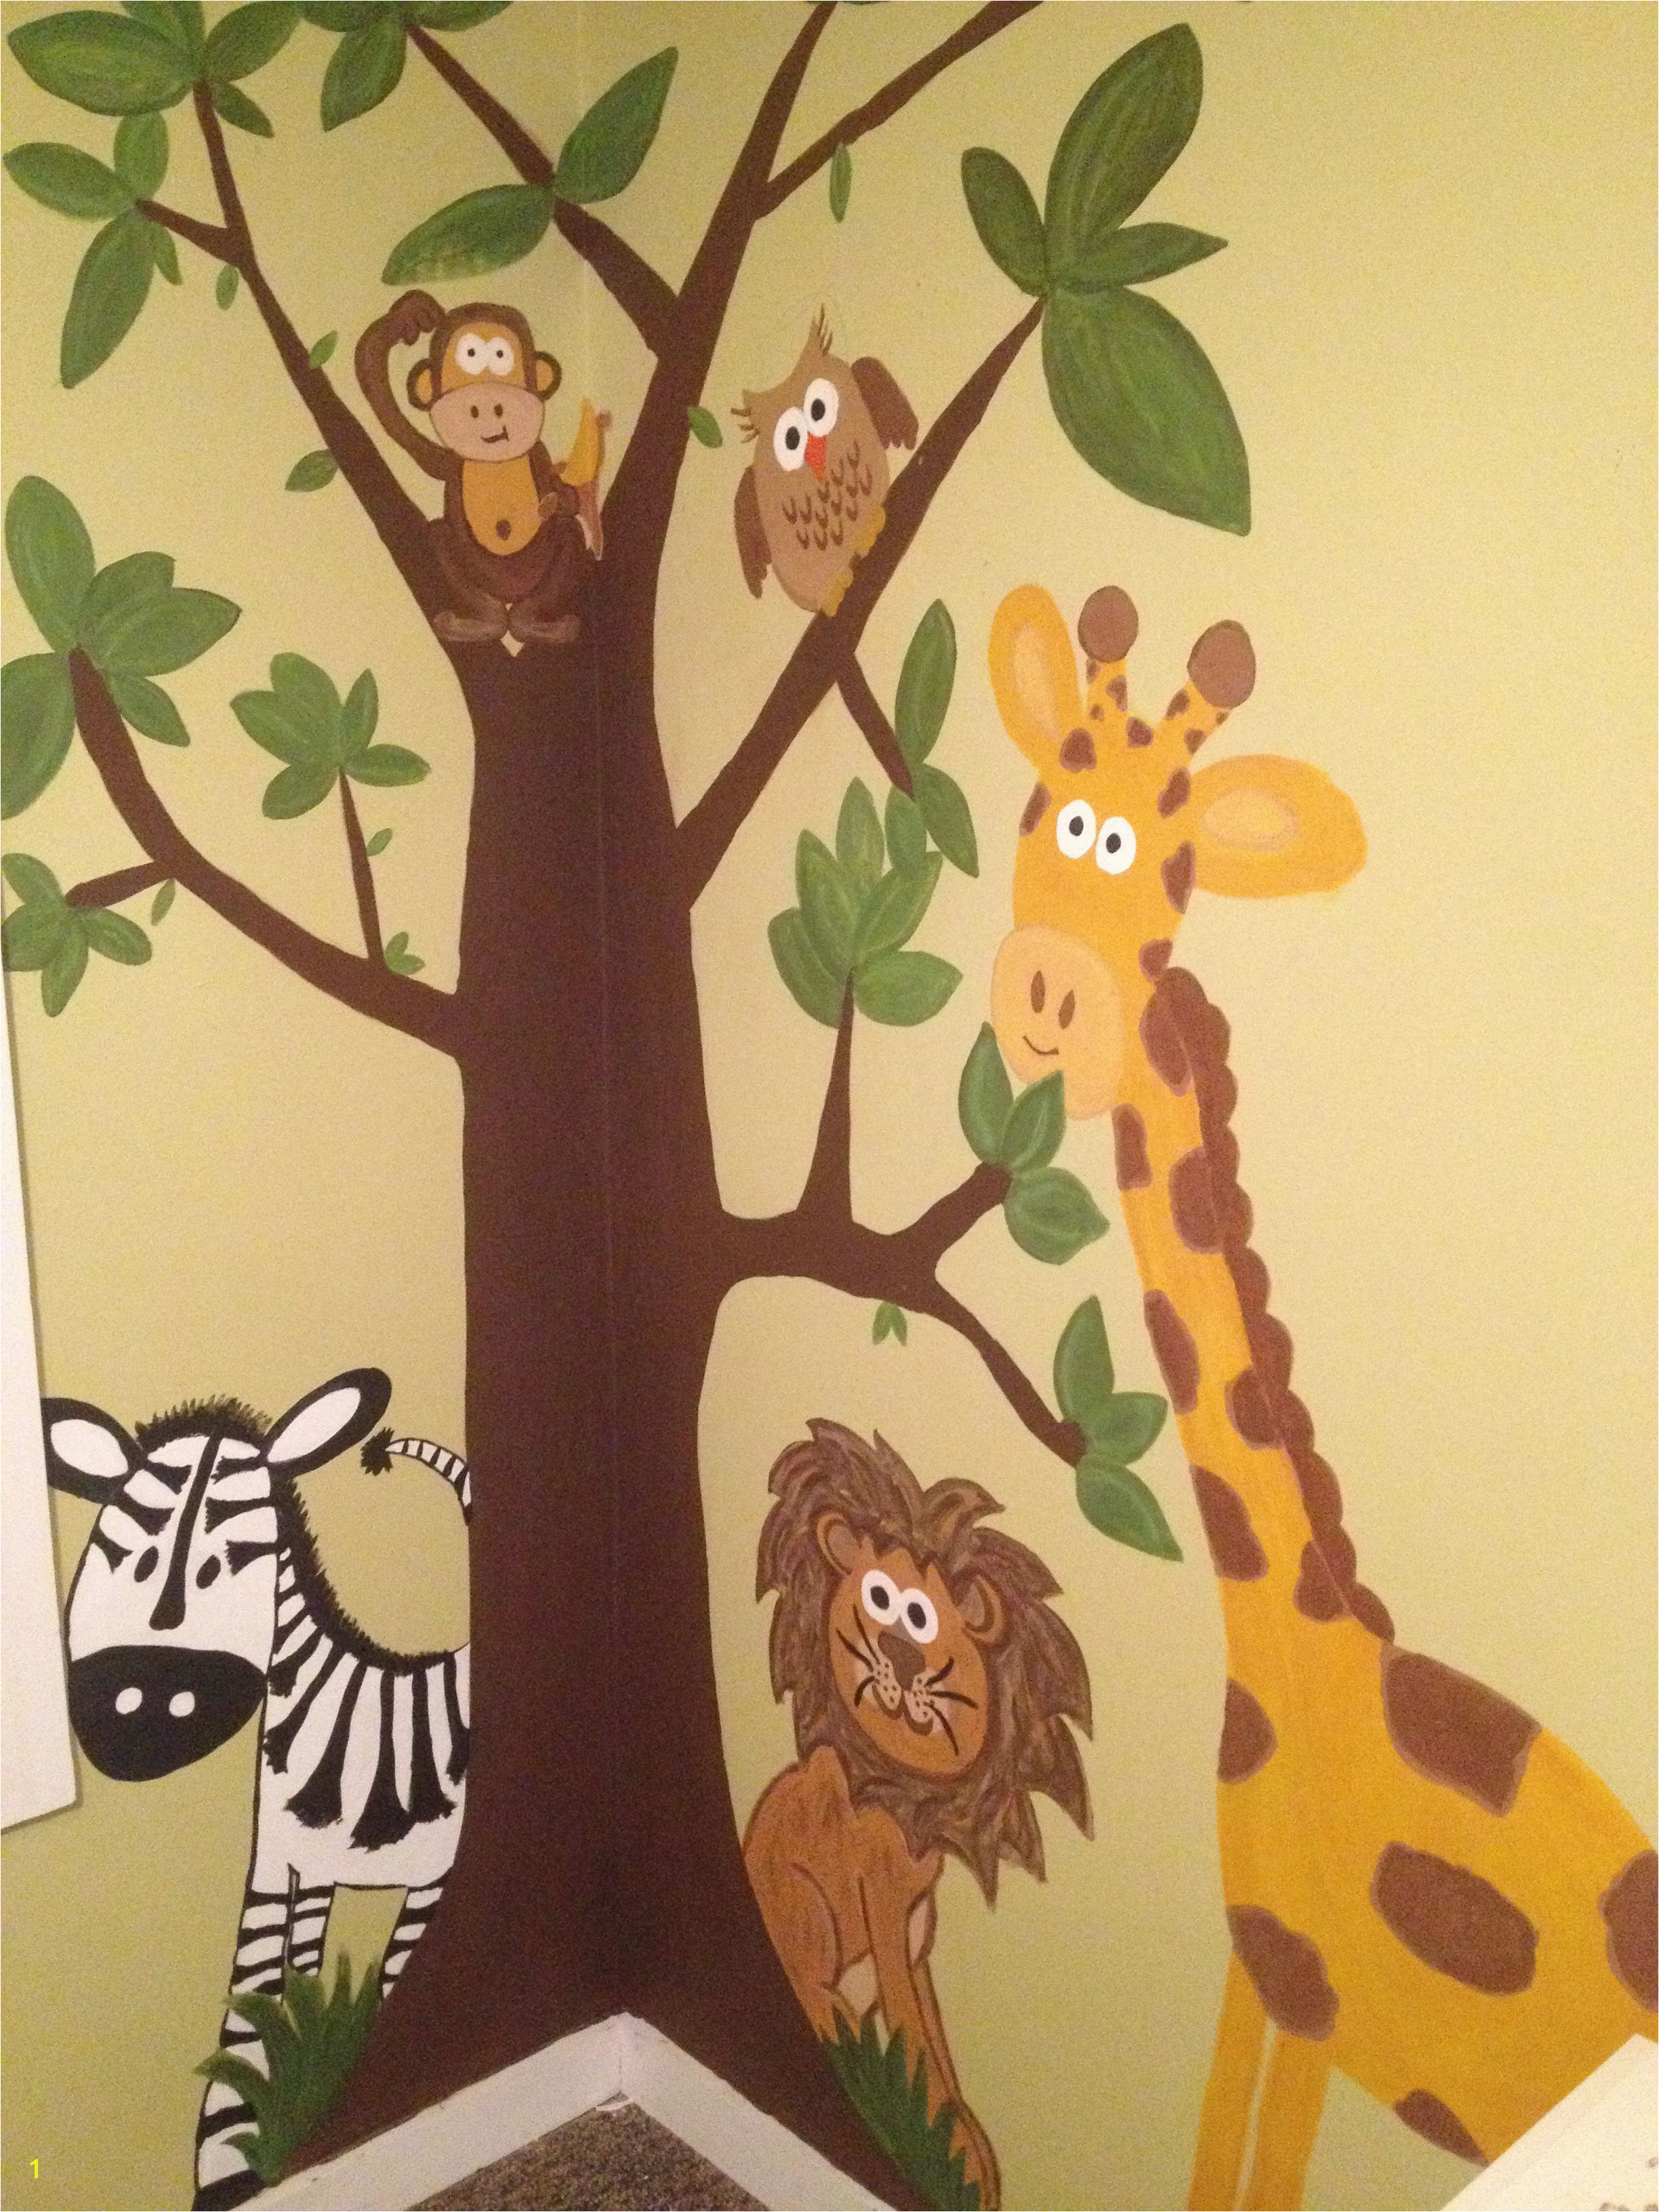 Jungle wall mural hand painted =]